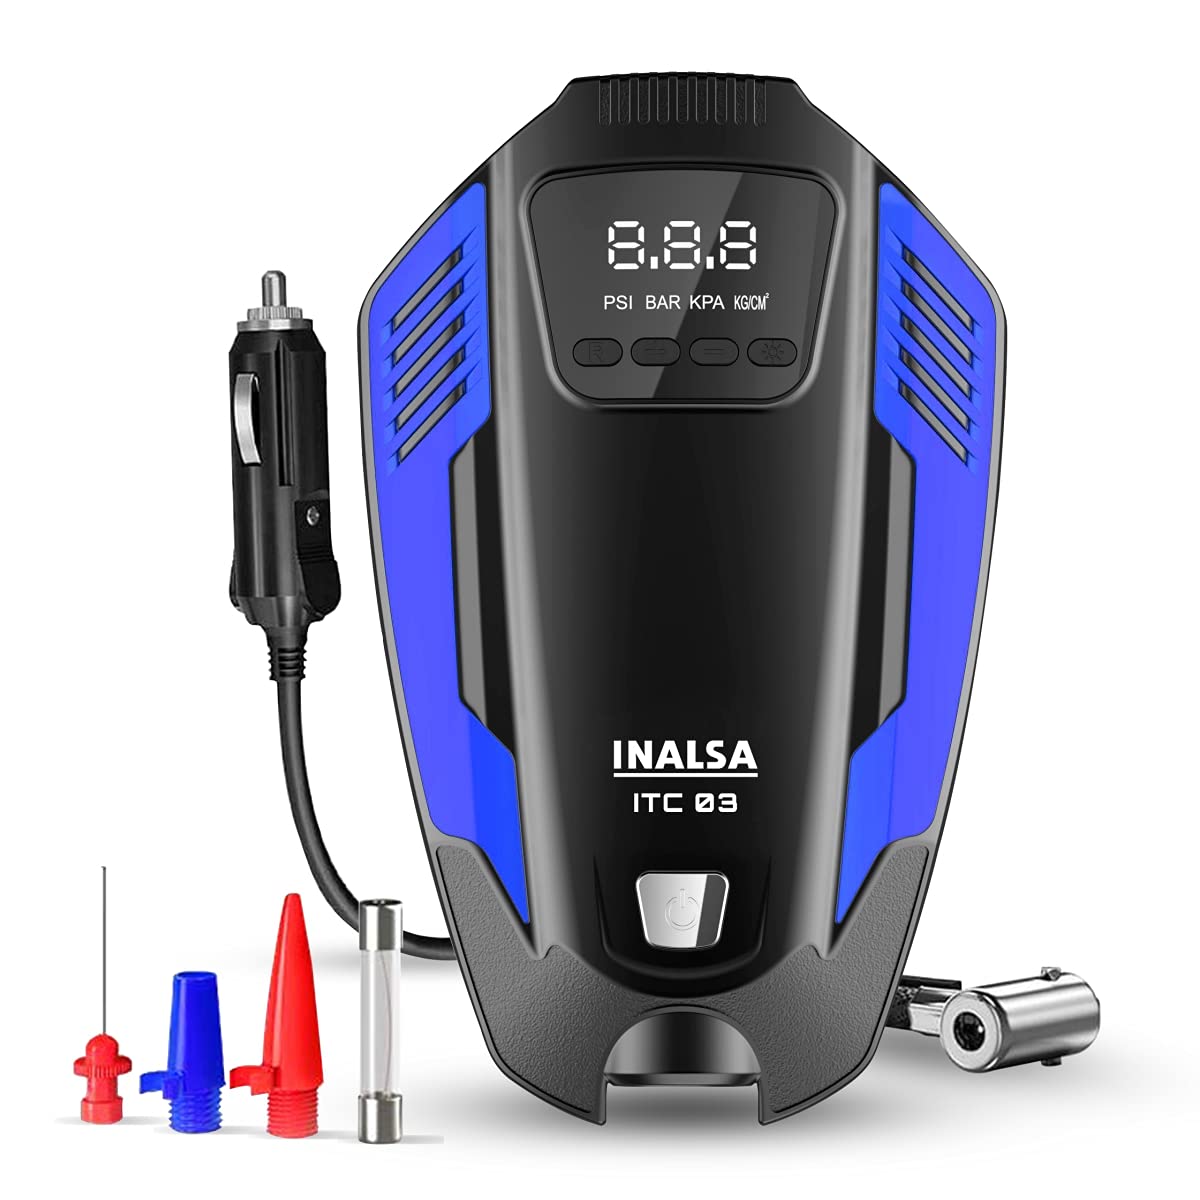 Inalsa ITC 03 tyre Inflator